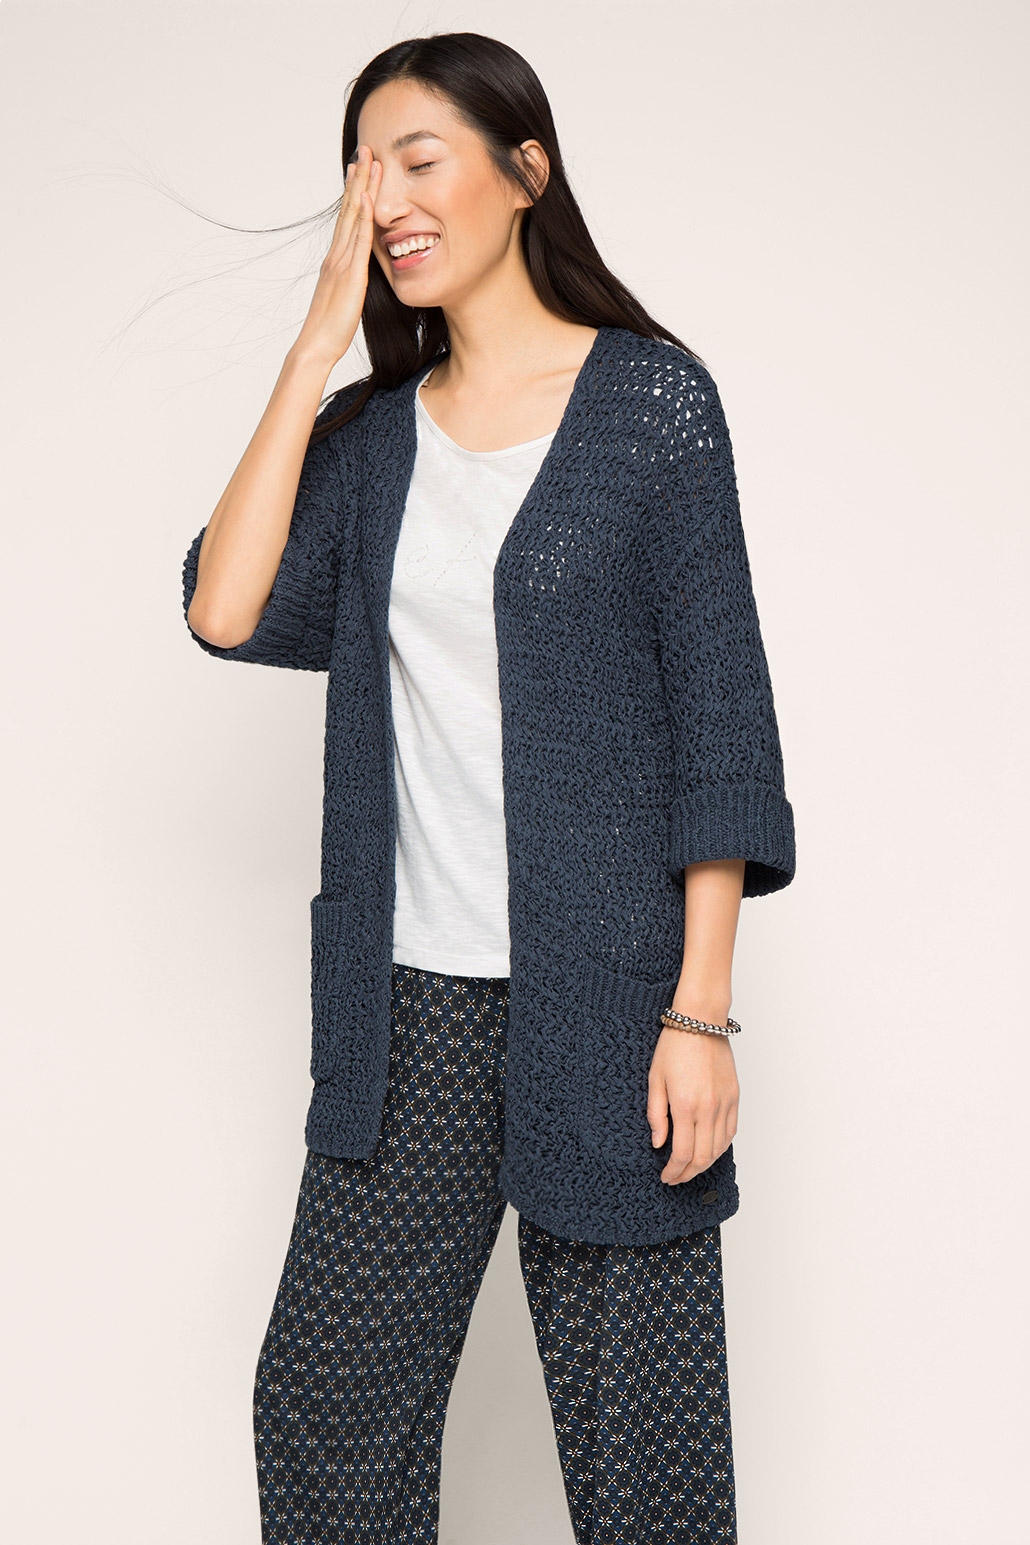 humanlike.co Cardigan in soft tape yarn by Esprit